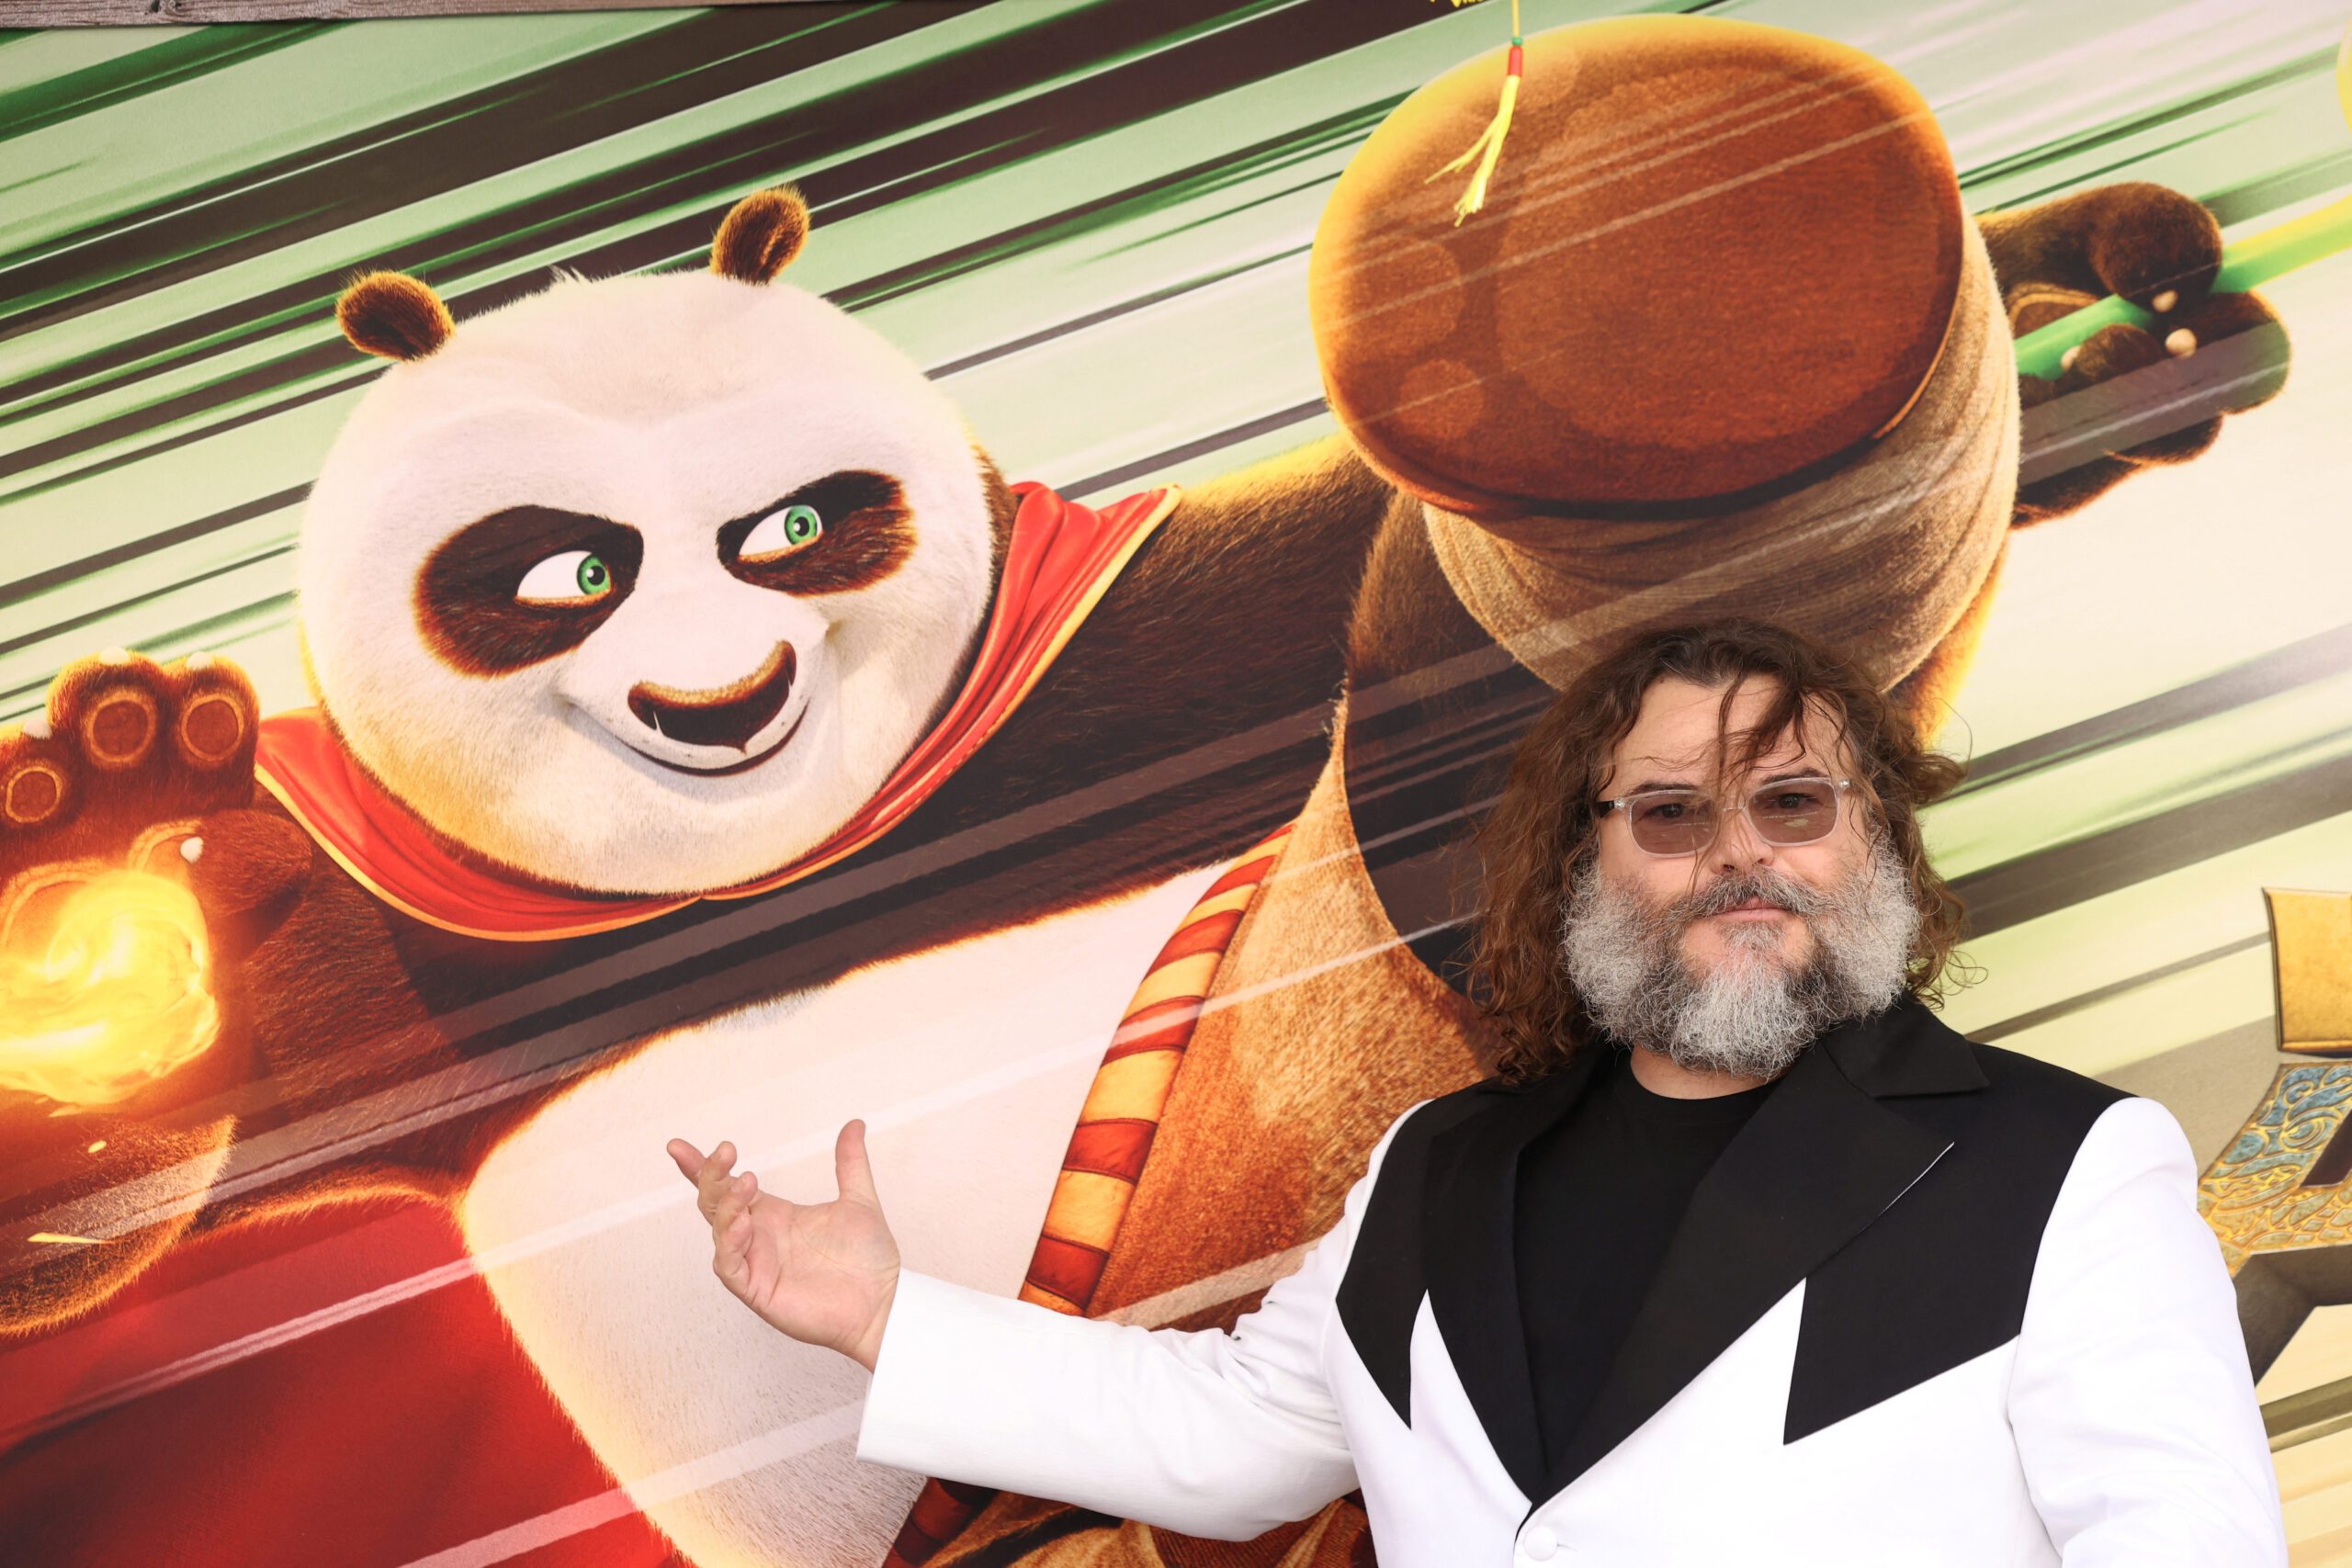 ‘Kung Fu Panda’ is back with some help from ‘The Six Million Dollar Man’